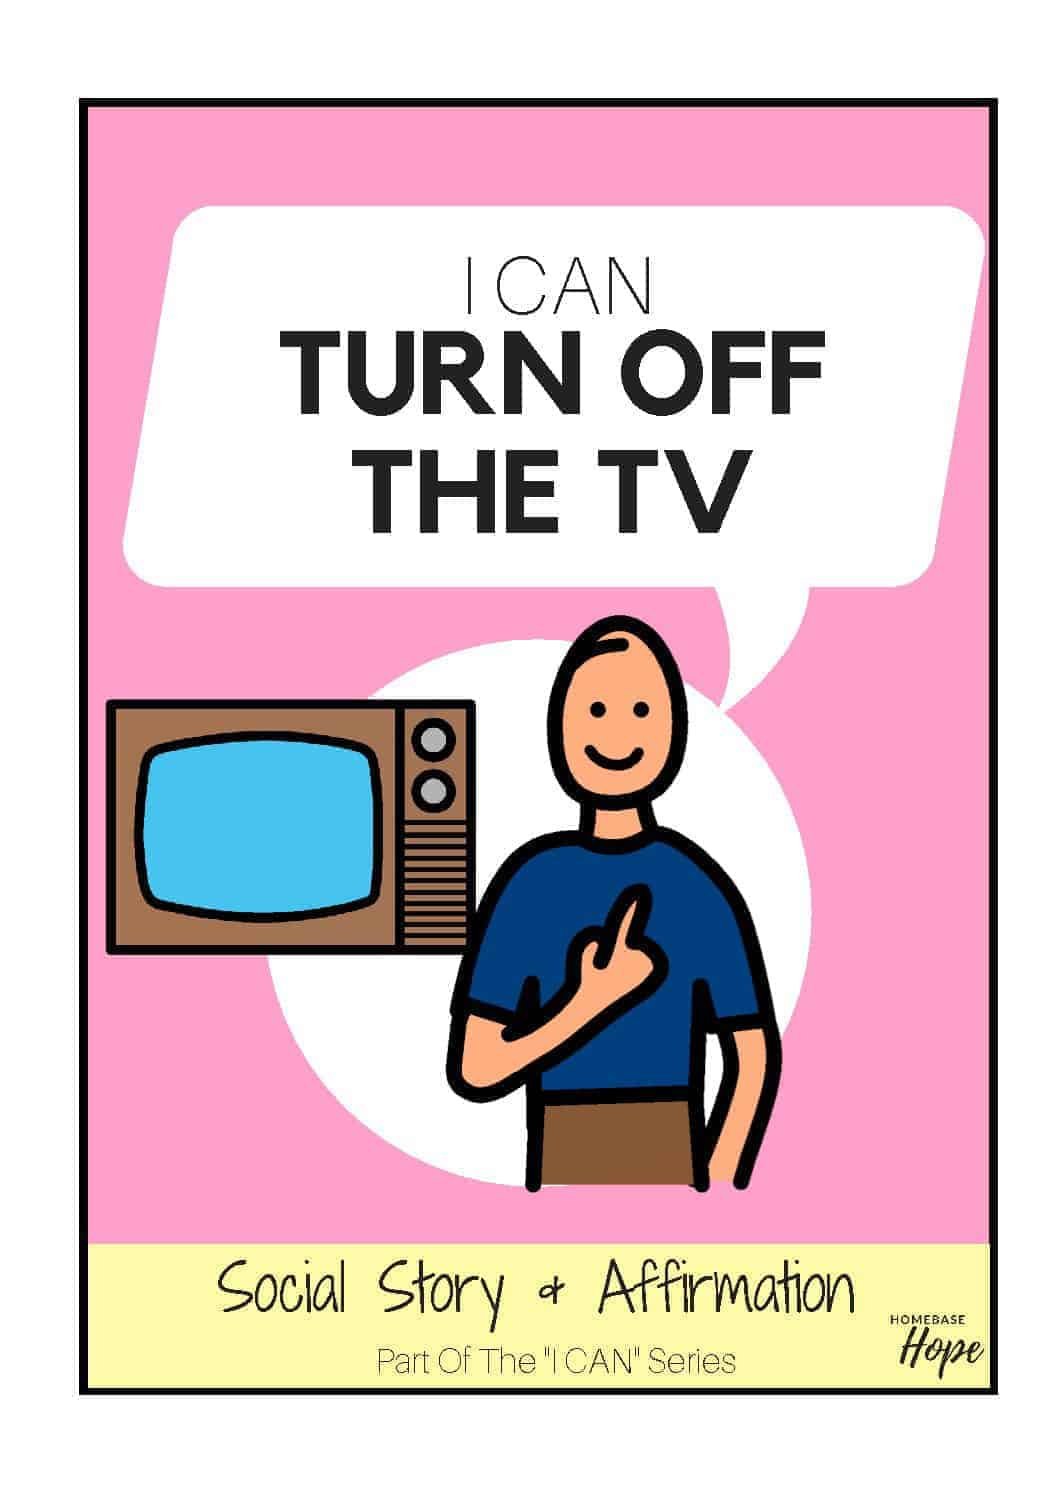 Can you turn the tv. Turn off the TV. Can you turn on the TV. Can you turn off TV. Turning off.